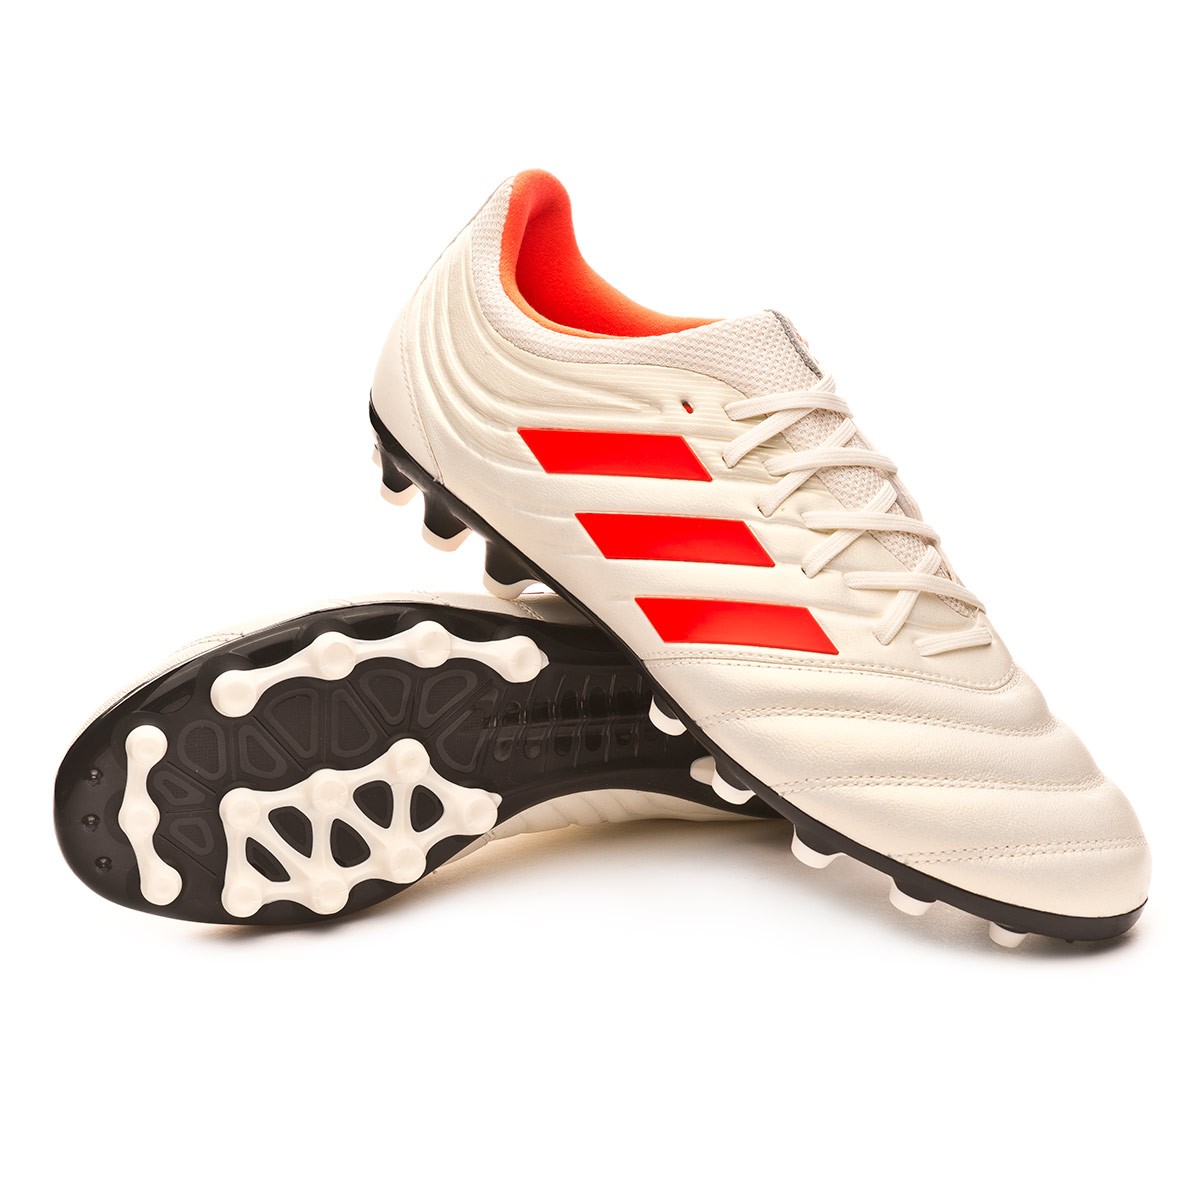 Football Boots adidas Copa 19.3 AG Off white-Solar red-Core black -  Football store Fútbol Emotion